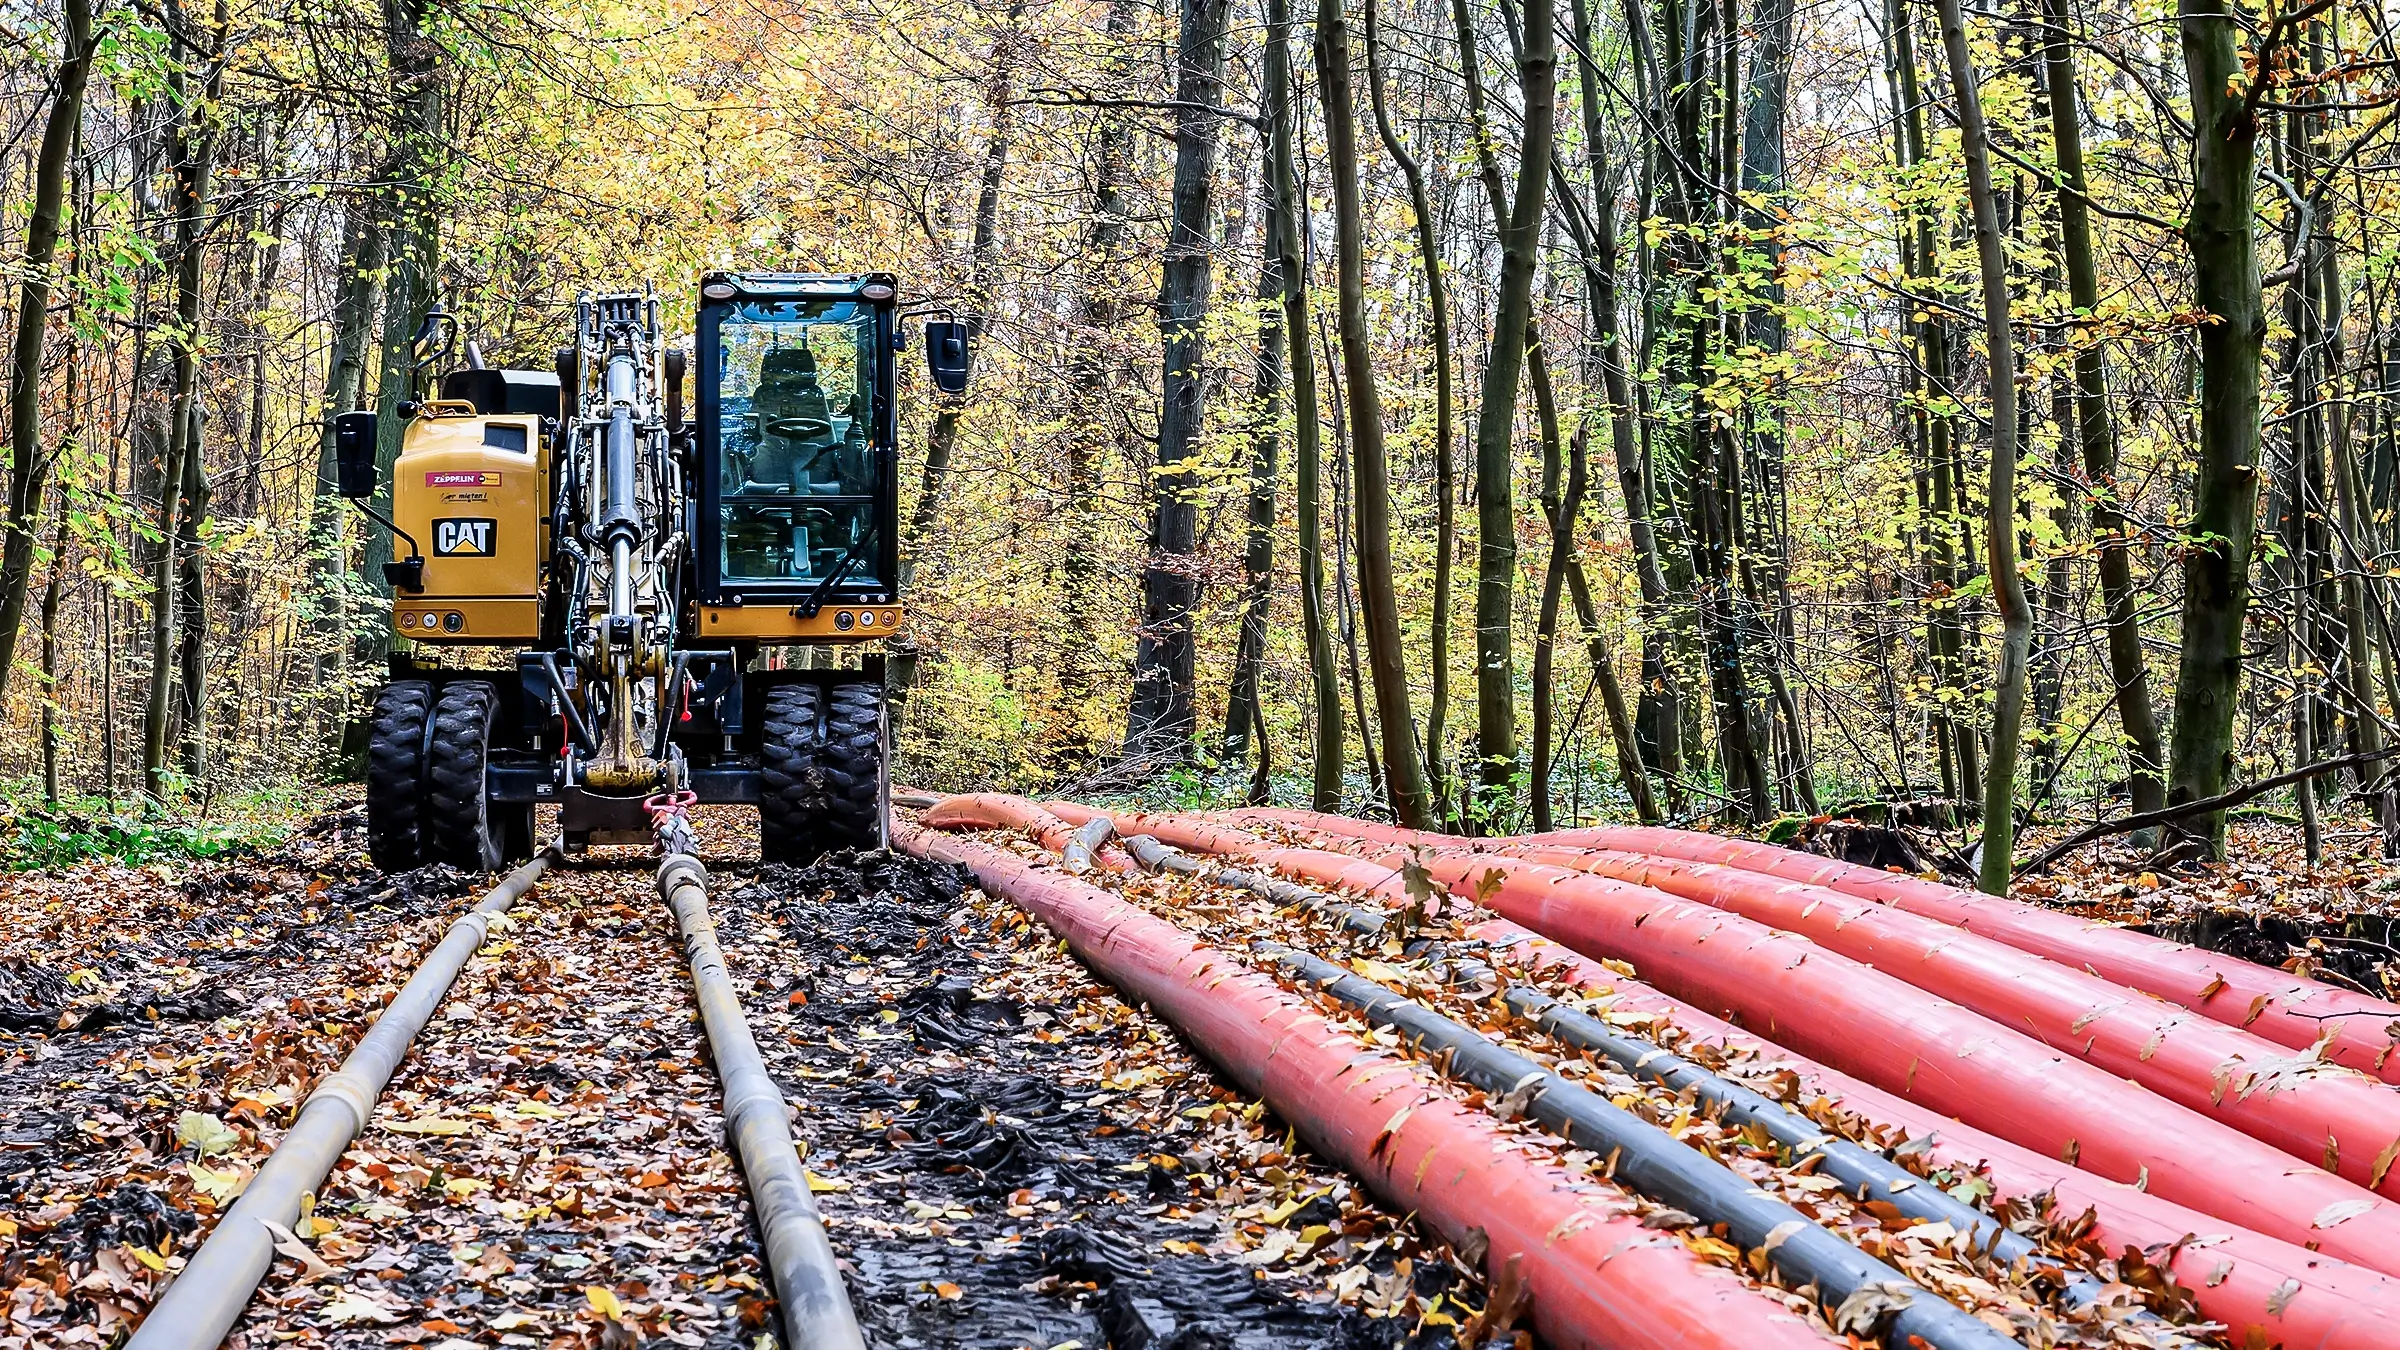 Pipe being pulled through a rural wooded area.